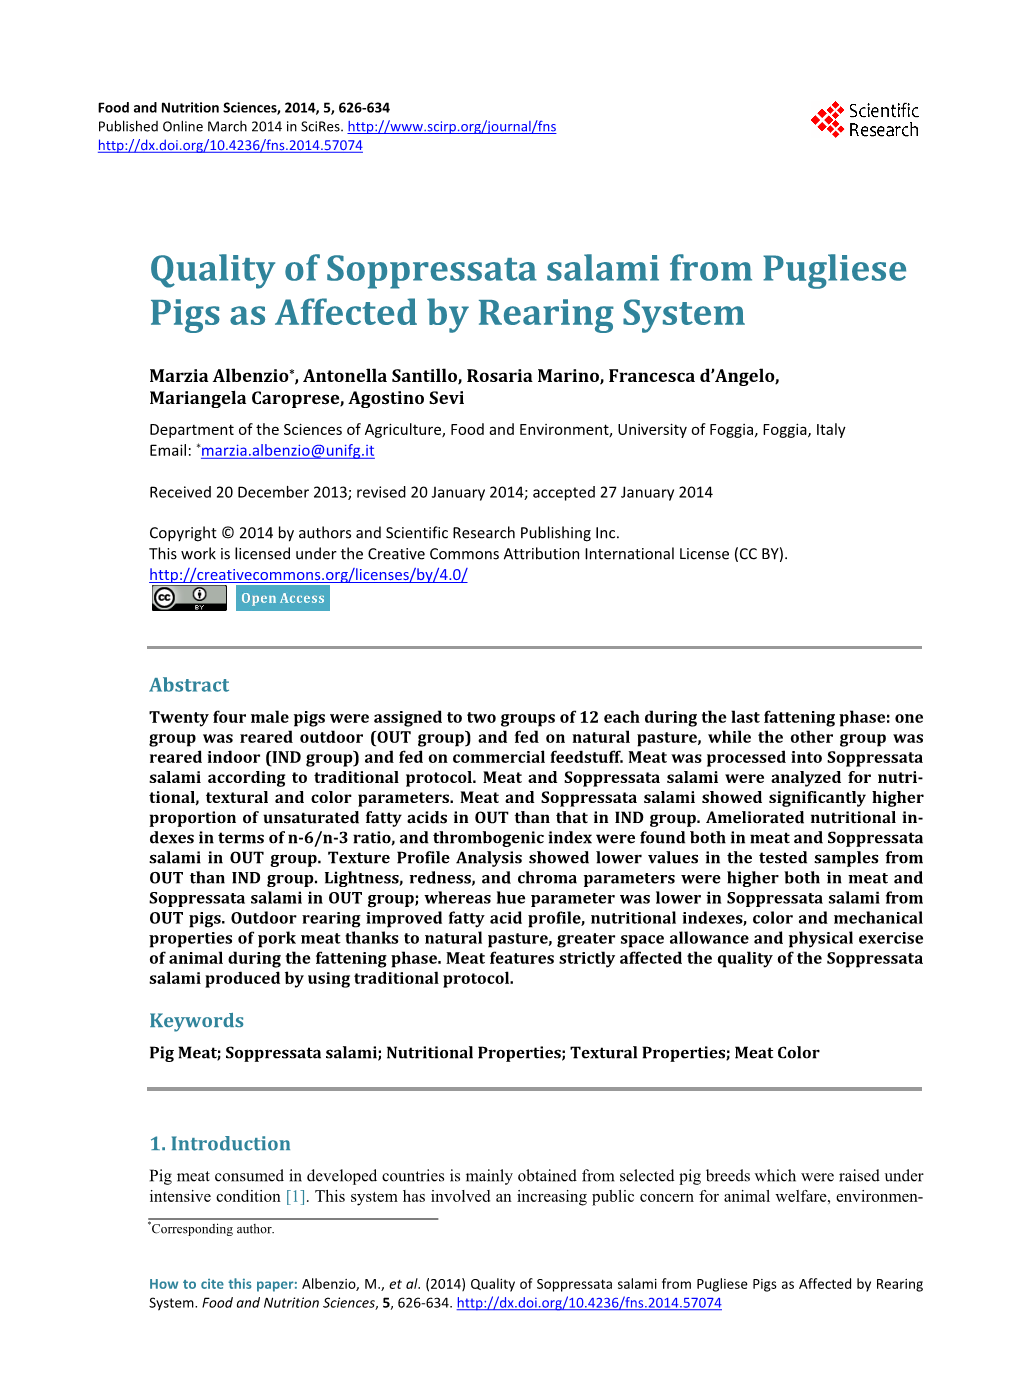 Quality of Soppressata Salami from Pugliese Pigs As Affected by Rearing System